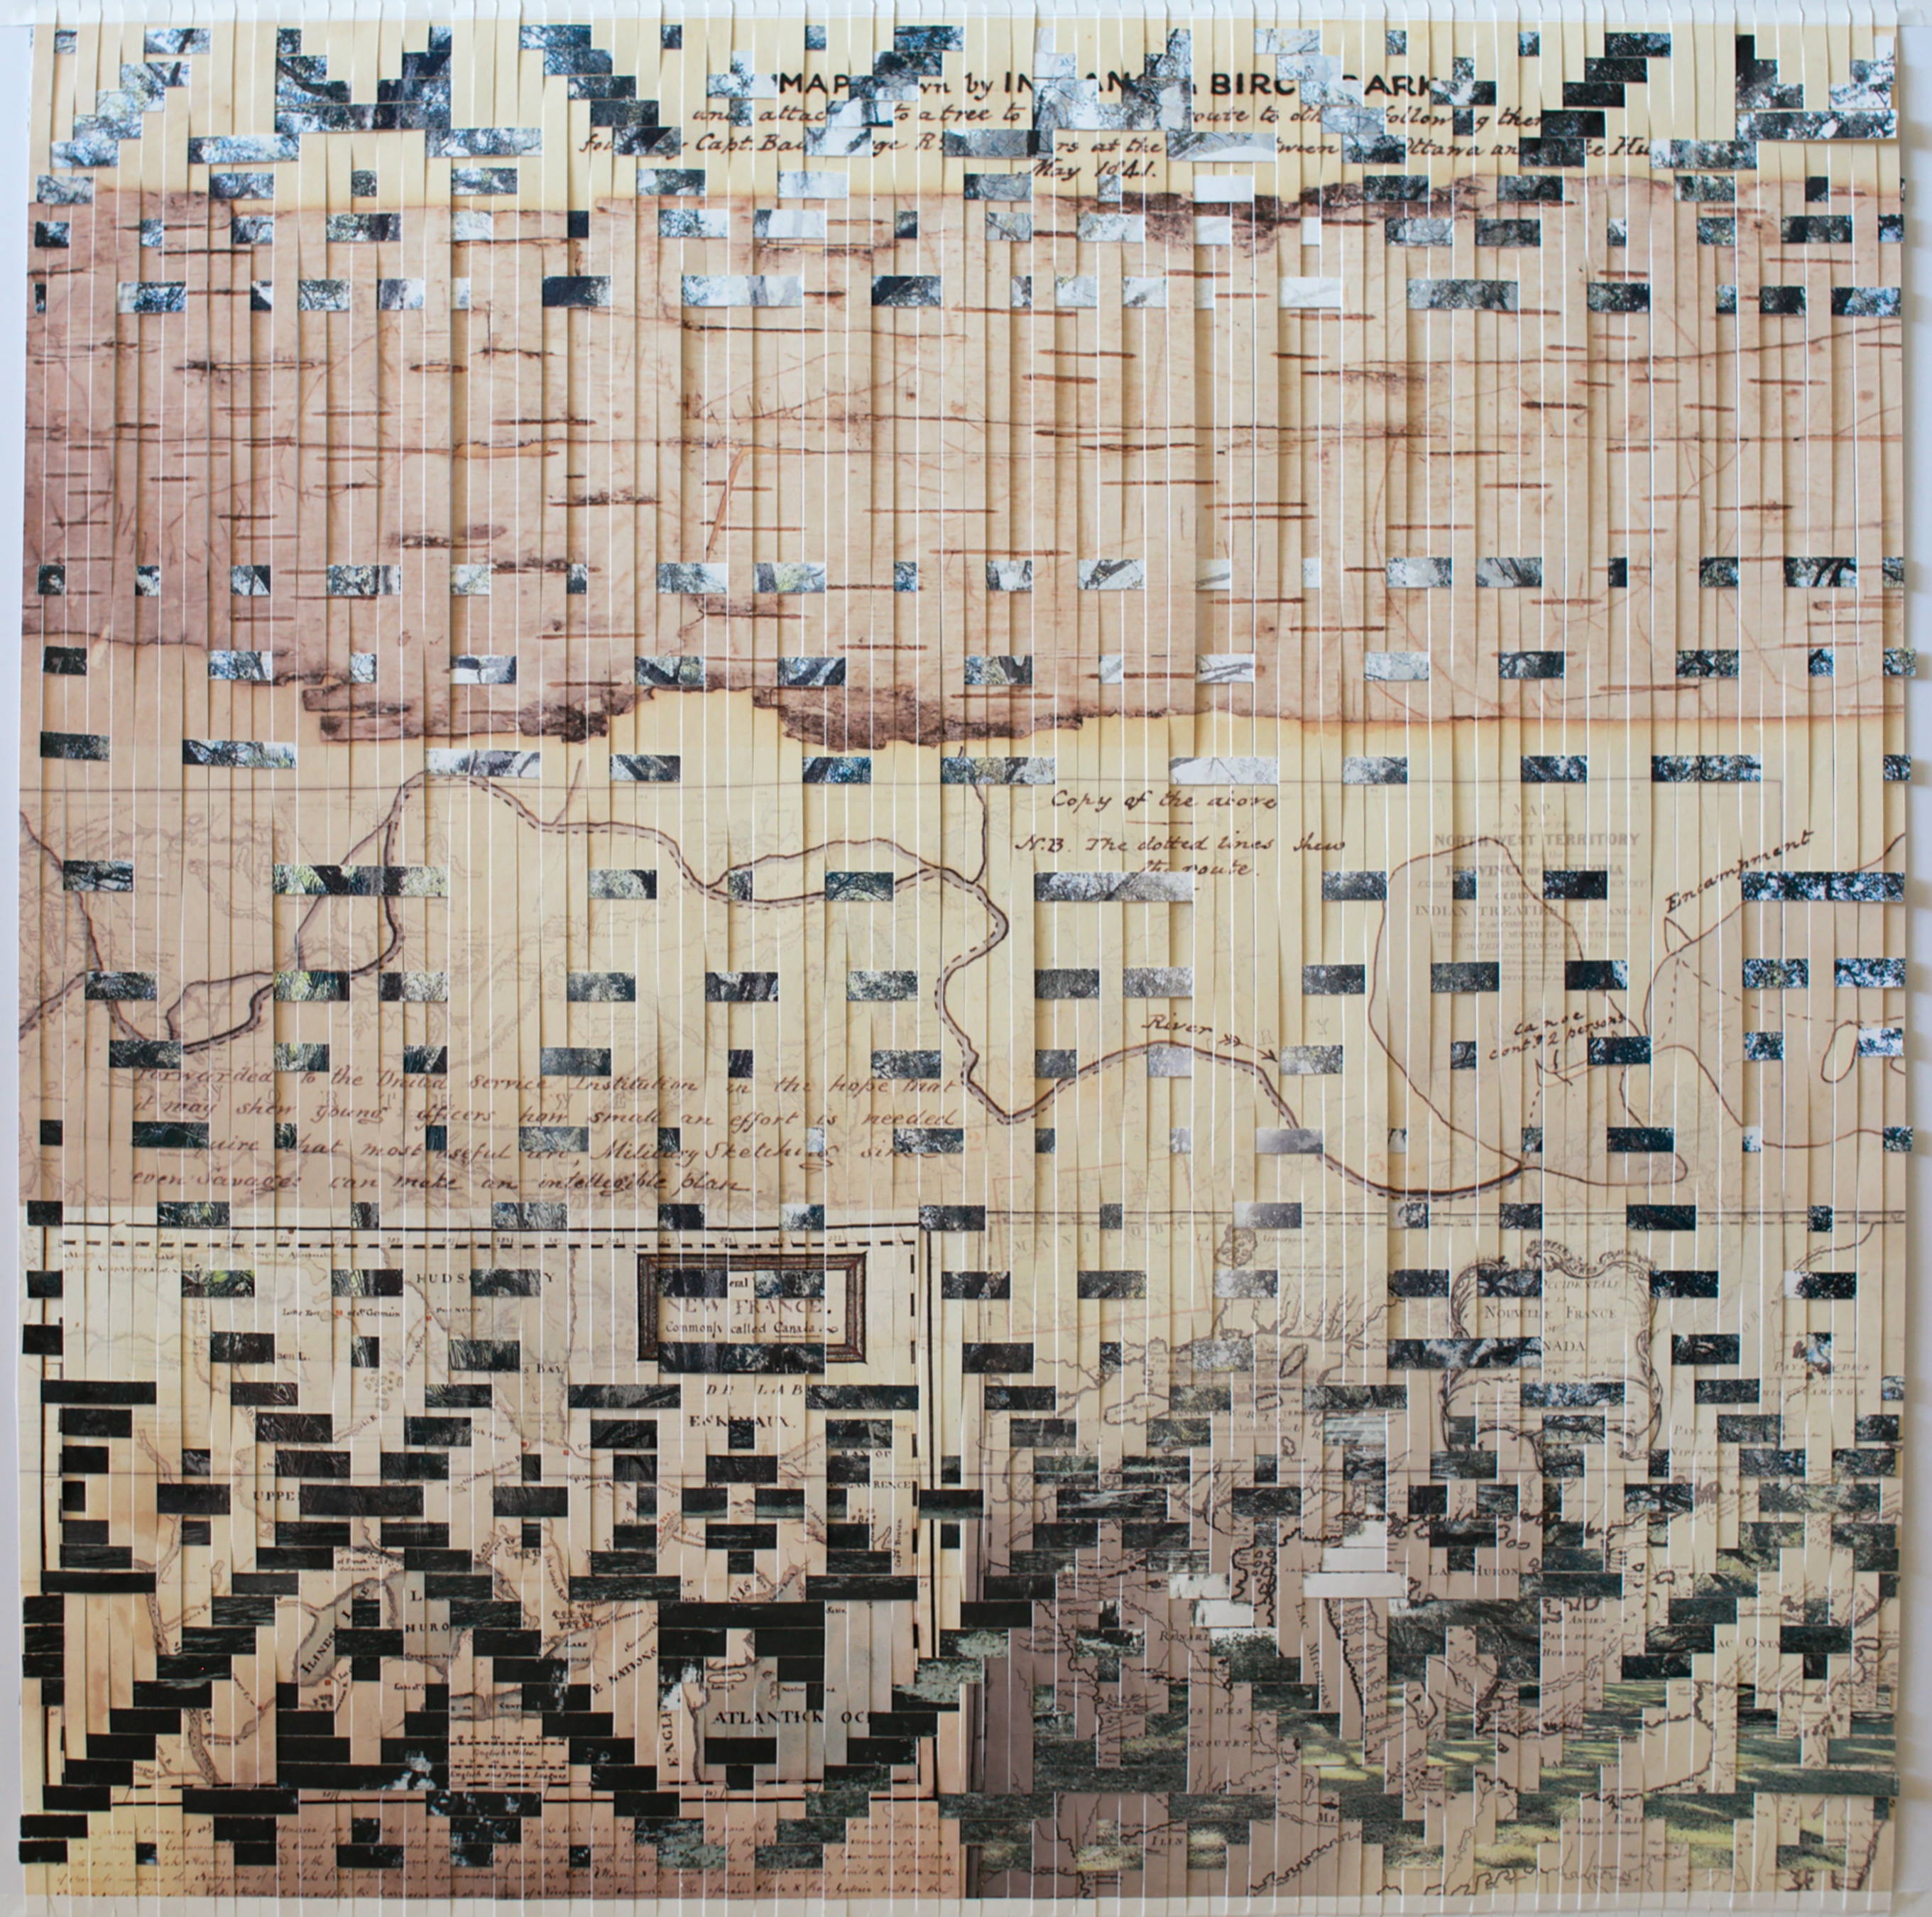 An abstract art piece that overlays angular, geometric design onto historical maps, notably the Ojibwe "kikaigon", also described and shown below. The material, from Sense’s website, includes woven archival inkjet prints on Hahnemuhle bamboo paper. While the geometric patterns take visual precedence, the background complicates the rigid angles through the fluid landmarks–like rivers, mountains, and footpaths–from the maps, as well as the scripted annotations of many of these geographical features. In turn, the text and illustrations on the maps are predominately obscured by the geometric patterns. Through the angular shapes, granular images of shapes appear, such as tree branches, rocks, dirt, and grass.